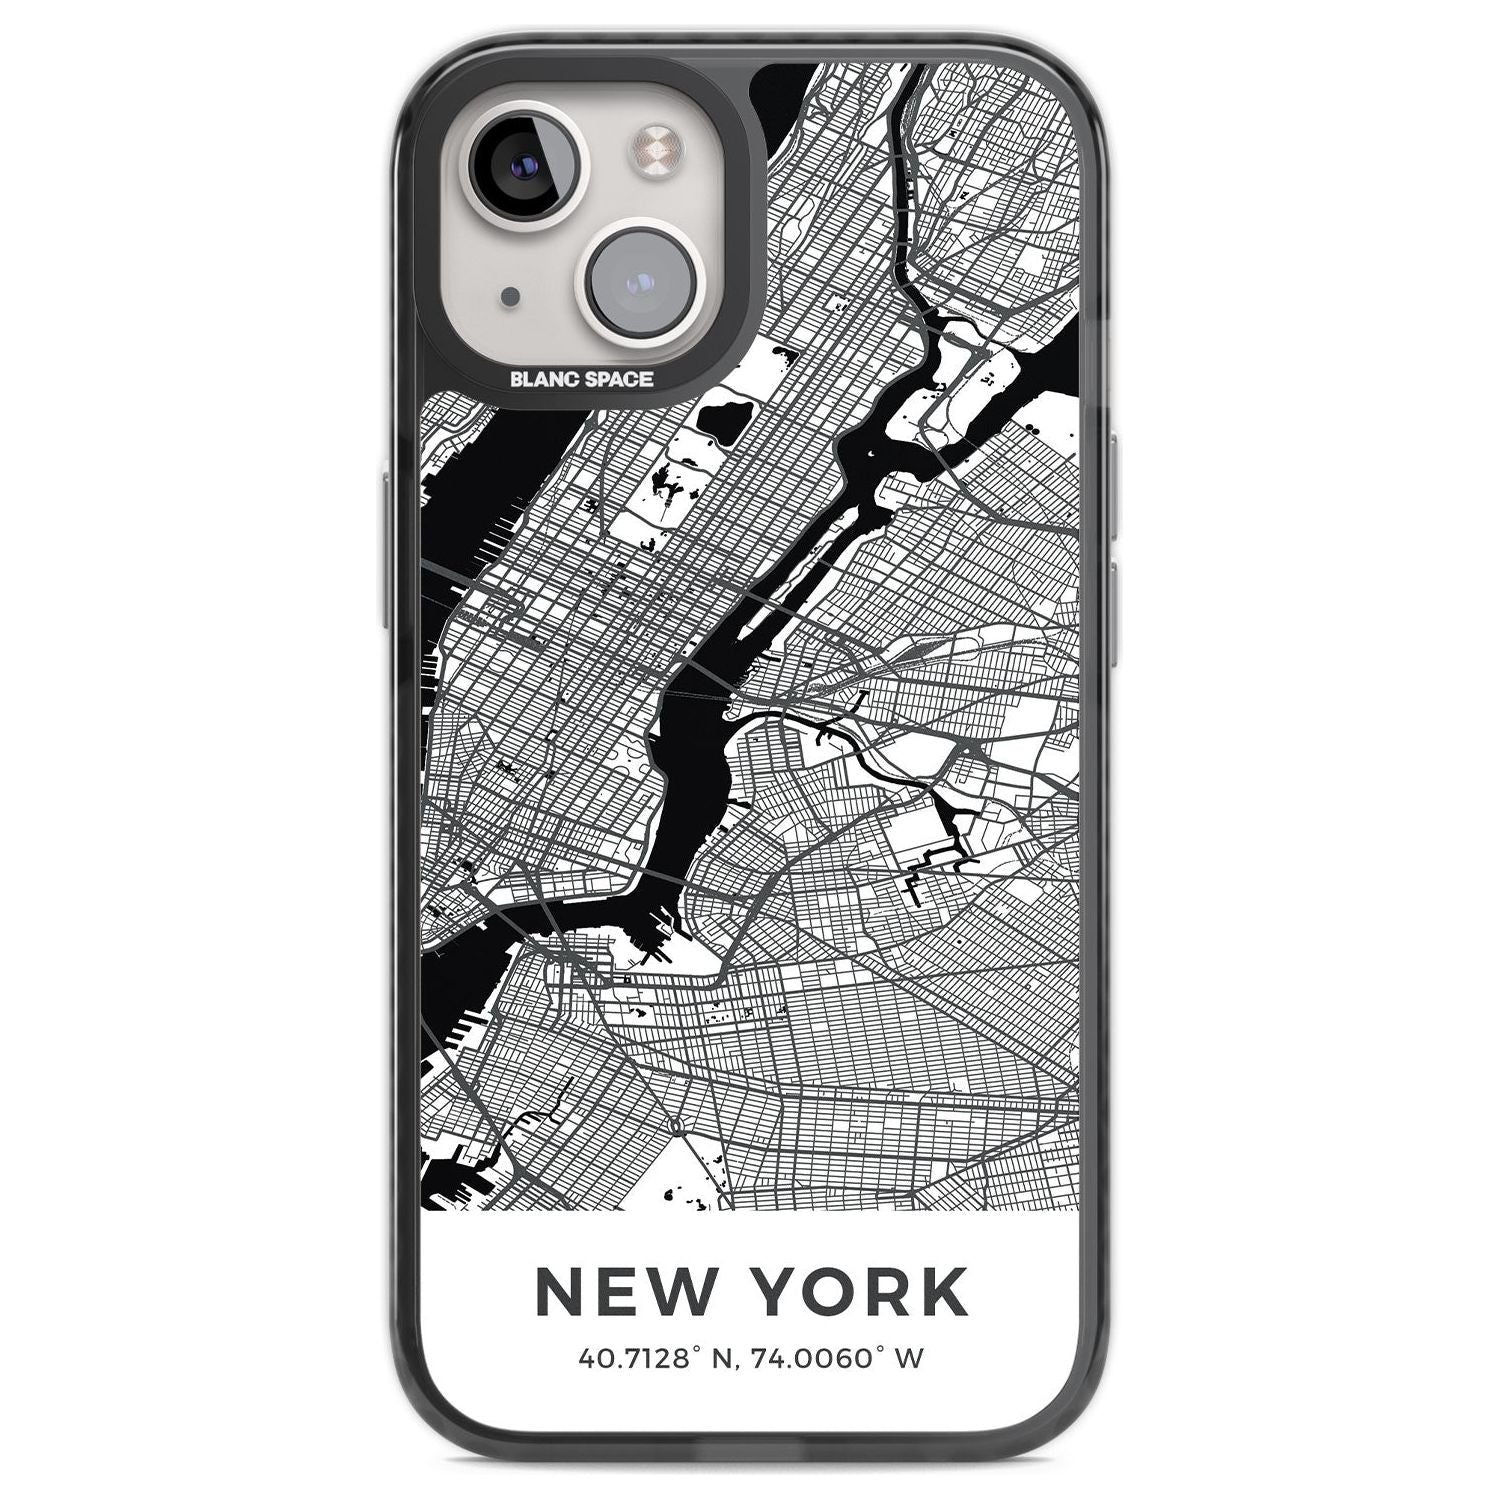 Map of New York, New York Phone Case iPhone 12 / Black Impact Case,iPhone 13 / Black Impact Case,iPhone 12 Pro / Black Impact Case,iPhone 14 / Black Impact Case,iPhone 15 Plus / Black Impact Case,iPhone 15 / Black Impact Case Blanc Space